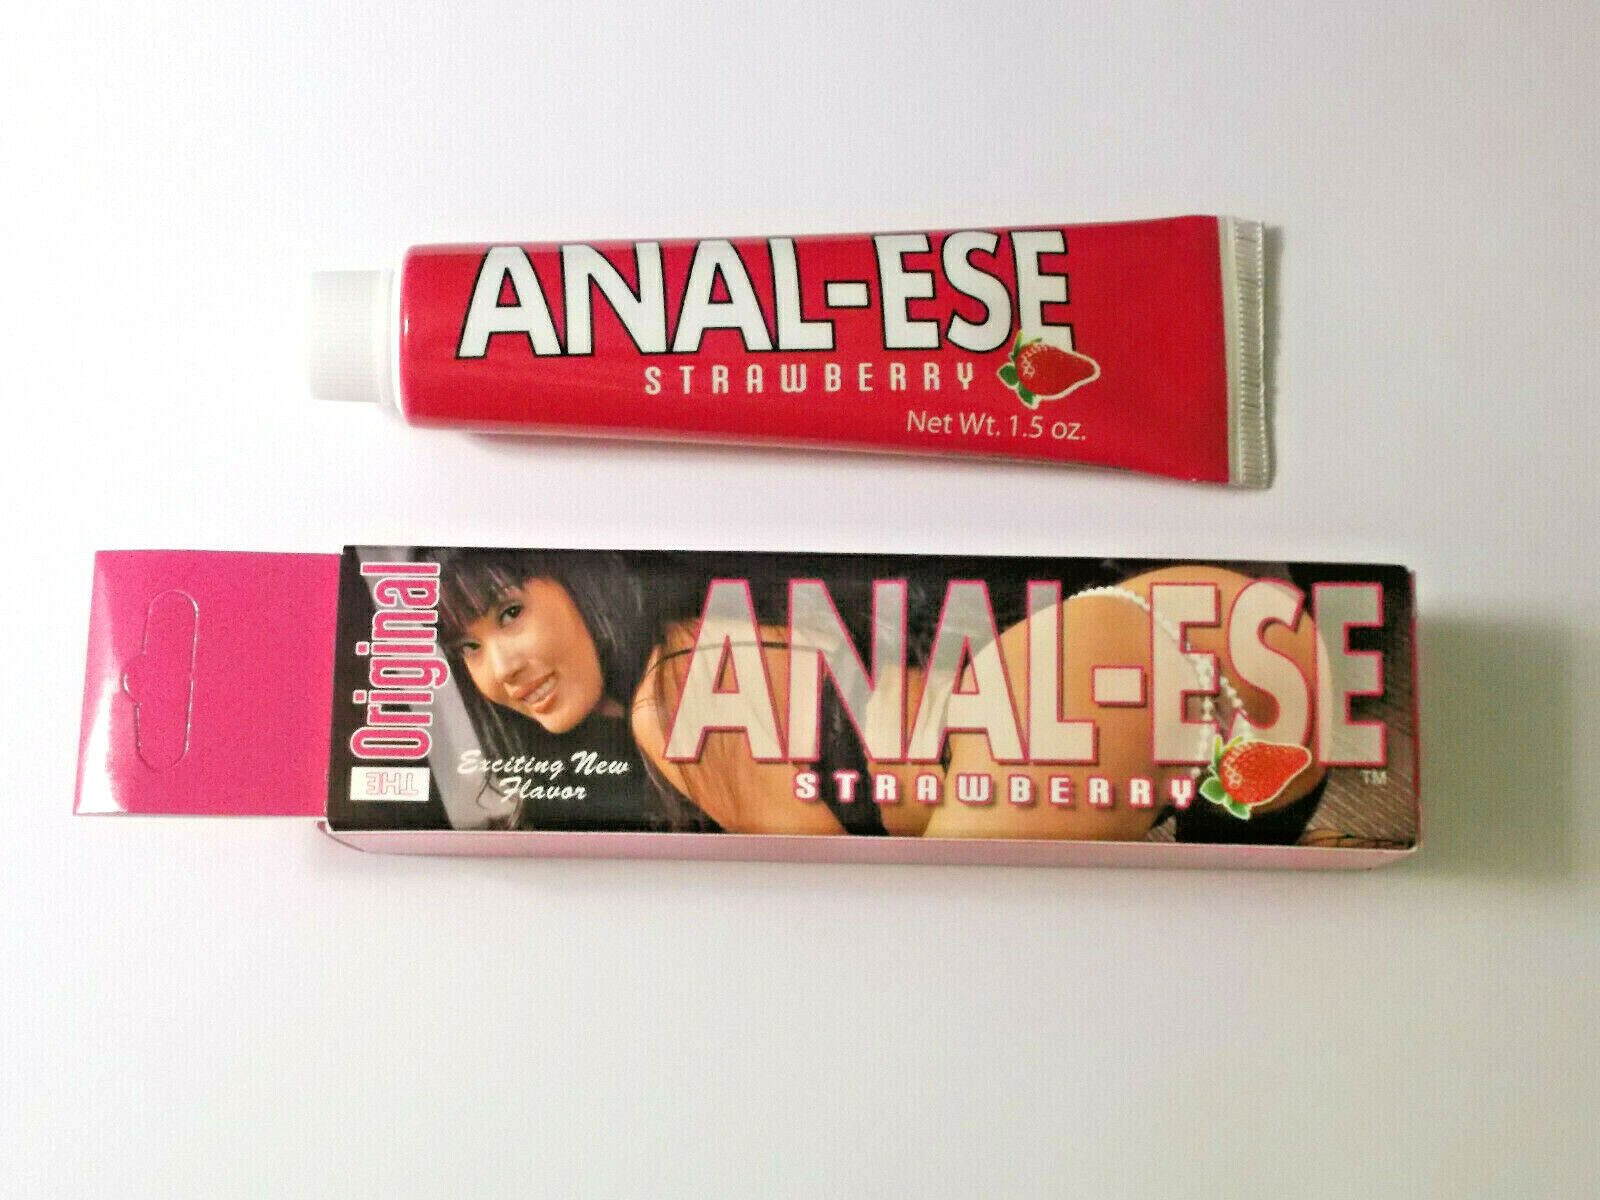 Anal Ese Gel Desensitizing Anal Lube Ease Strawberry Flavored 1.5 oz Large Size